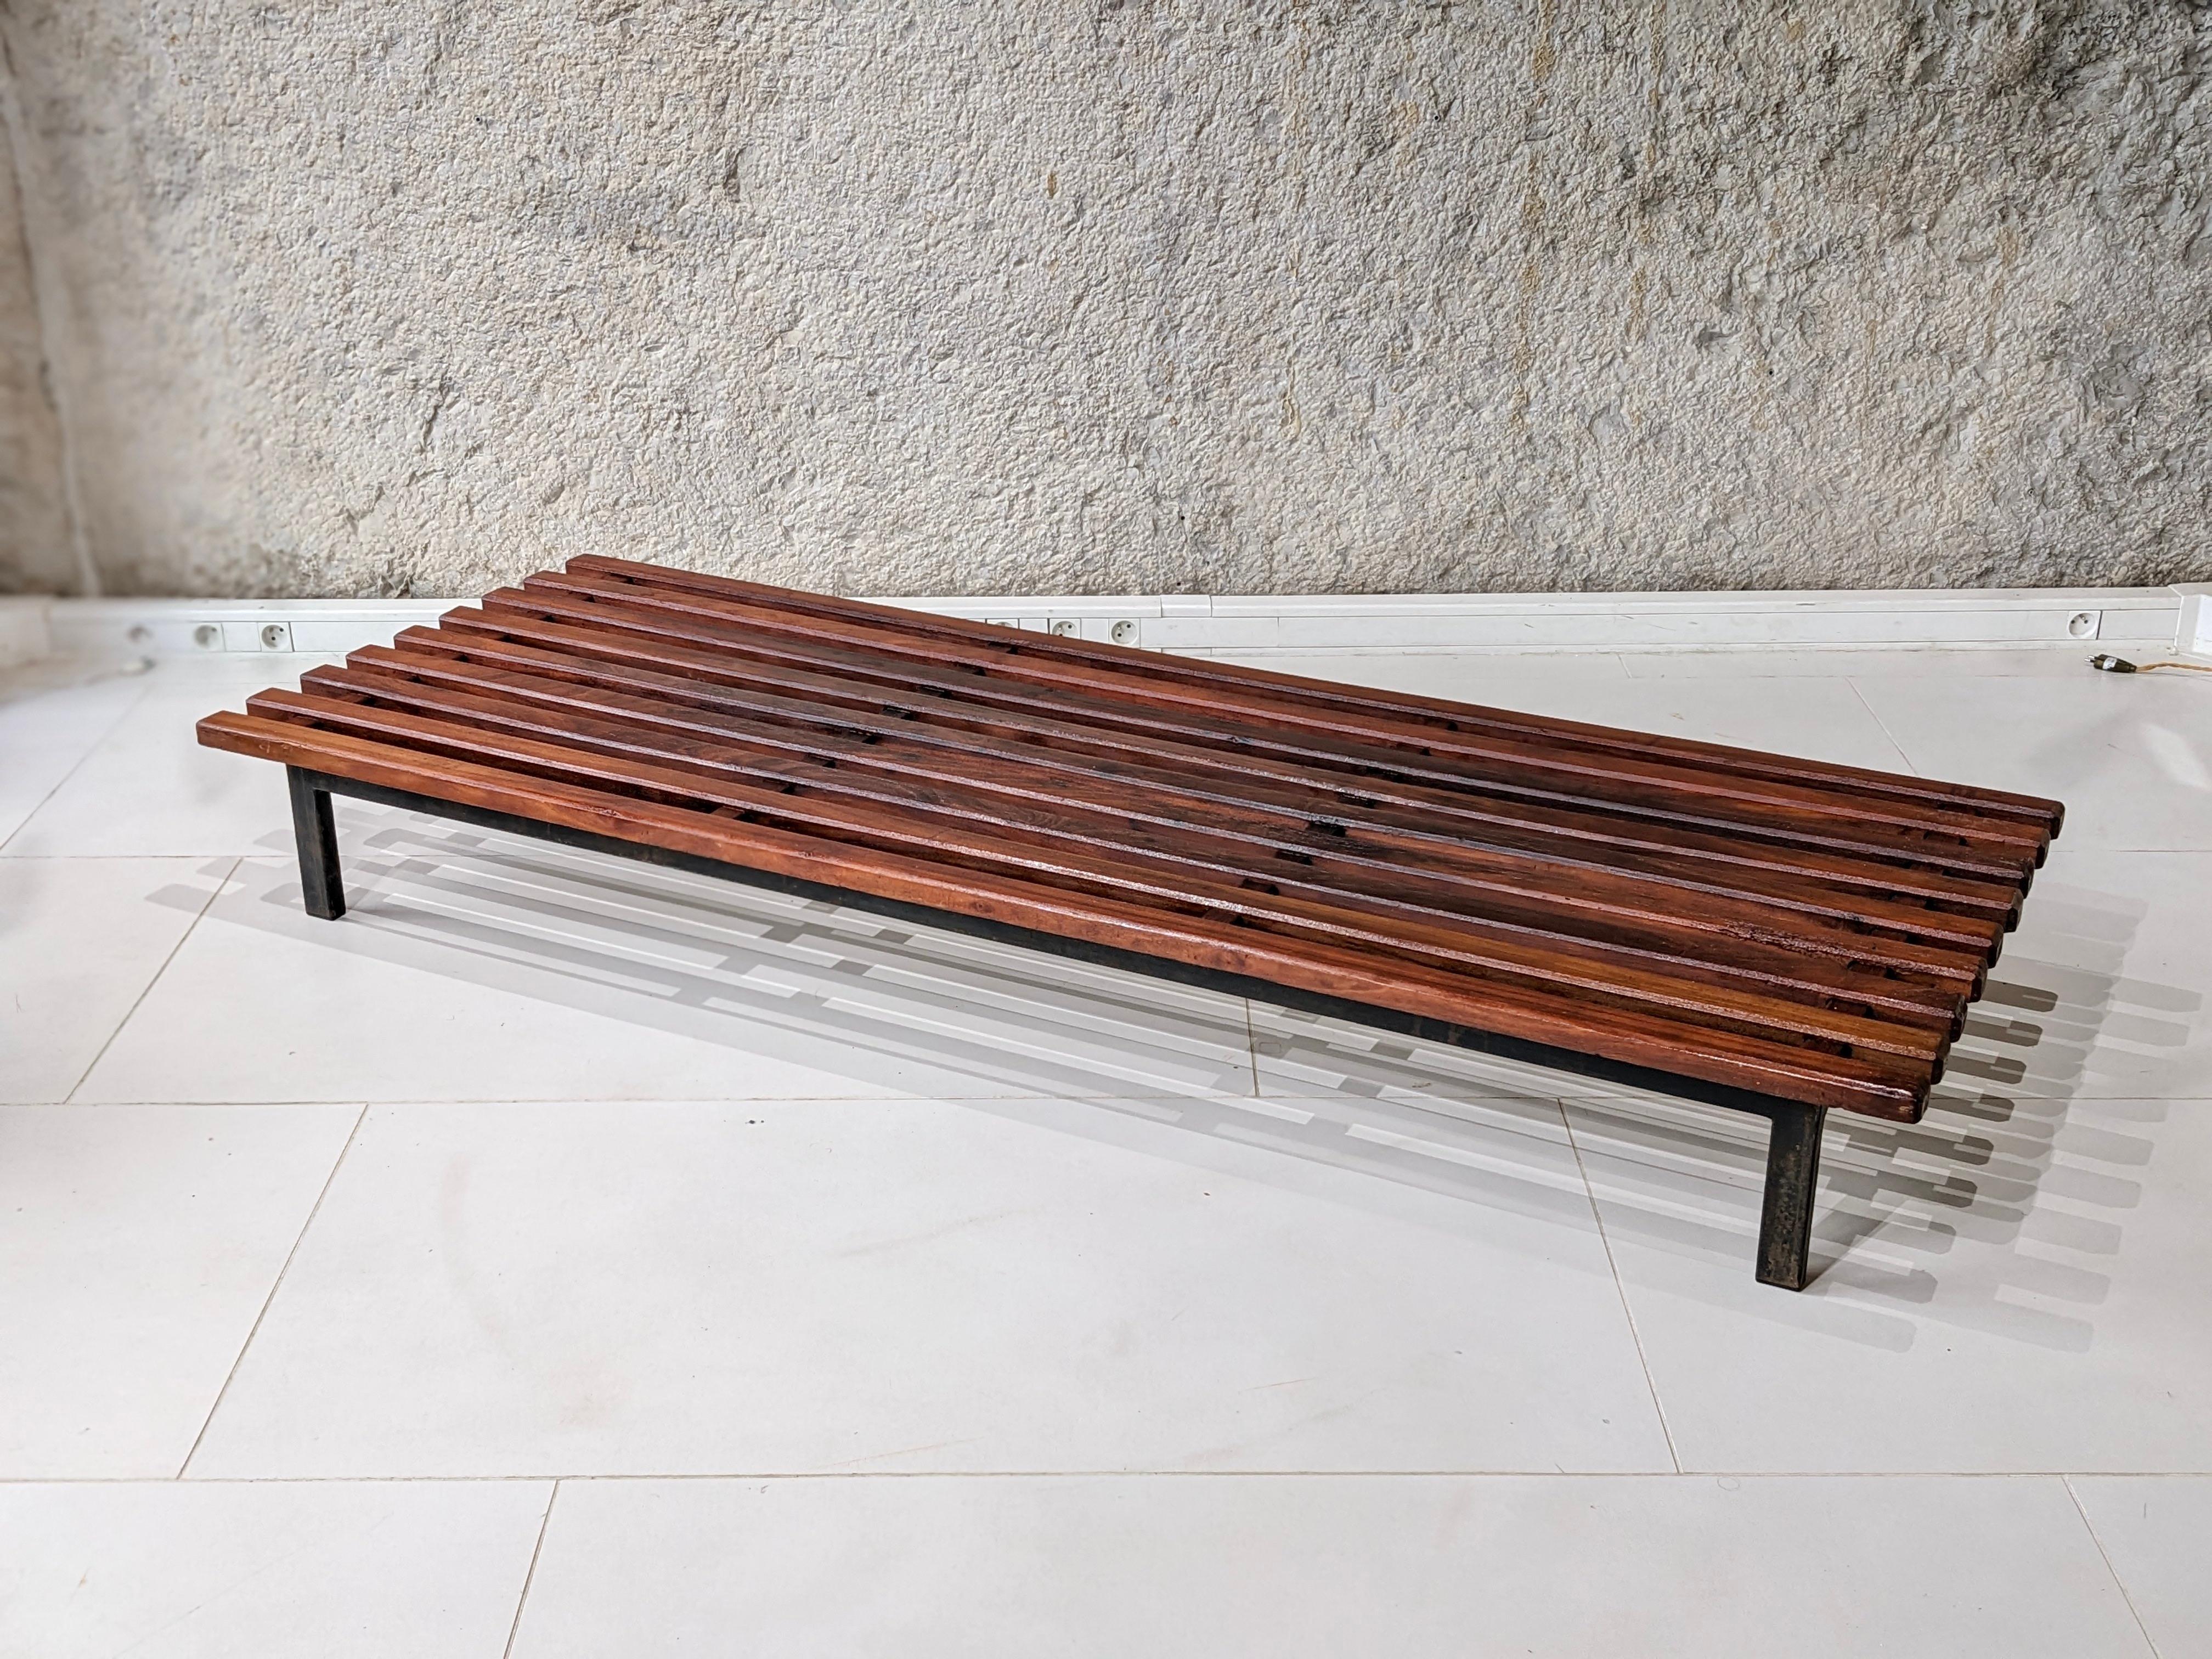 Cansado sofa bed by Charlotte Perriand.
circa 1960. In mahogany wood.
Mattress and bolster in grey fabric. They are not original.
Good condition. The bench has been re-varnished. Some small defects on the wood (see pictures).
Provenance :